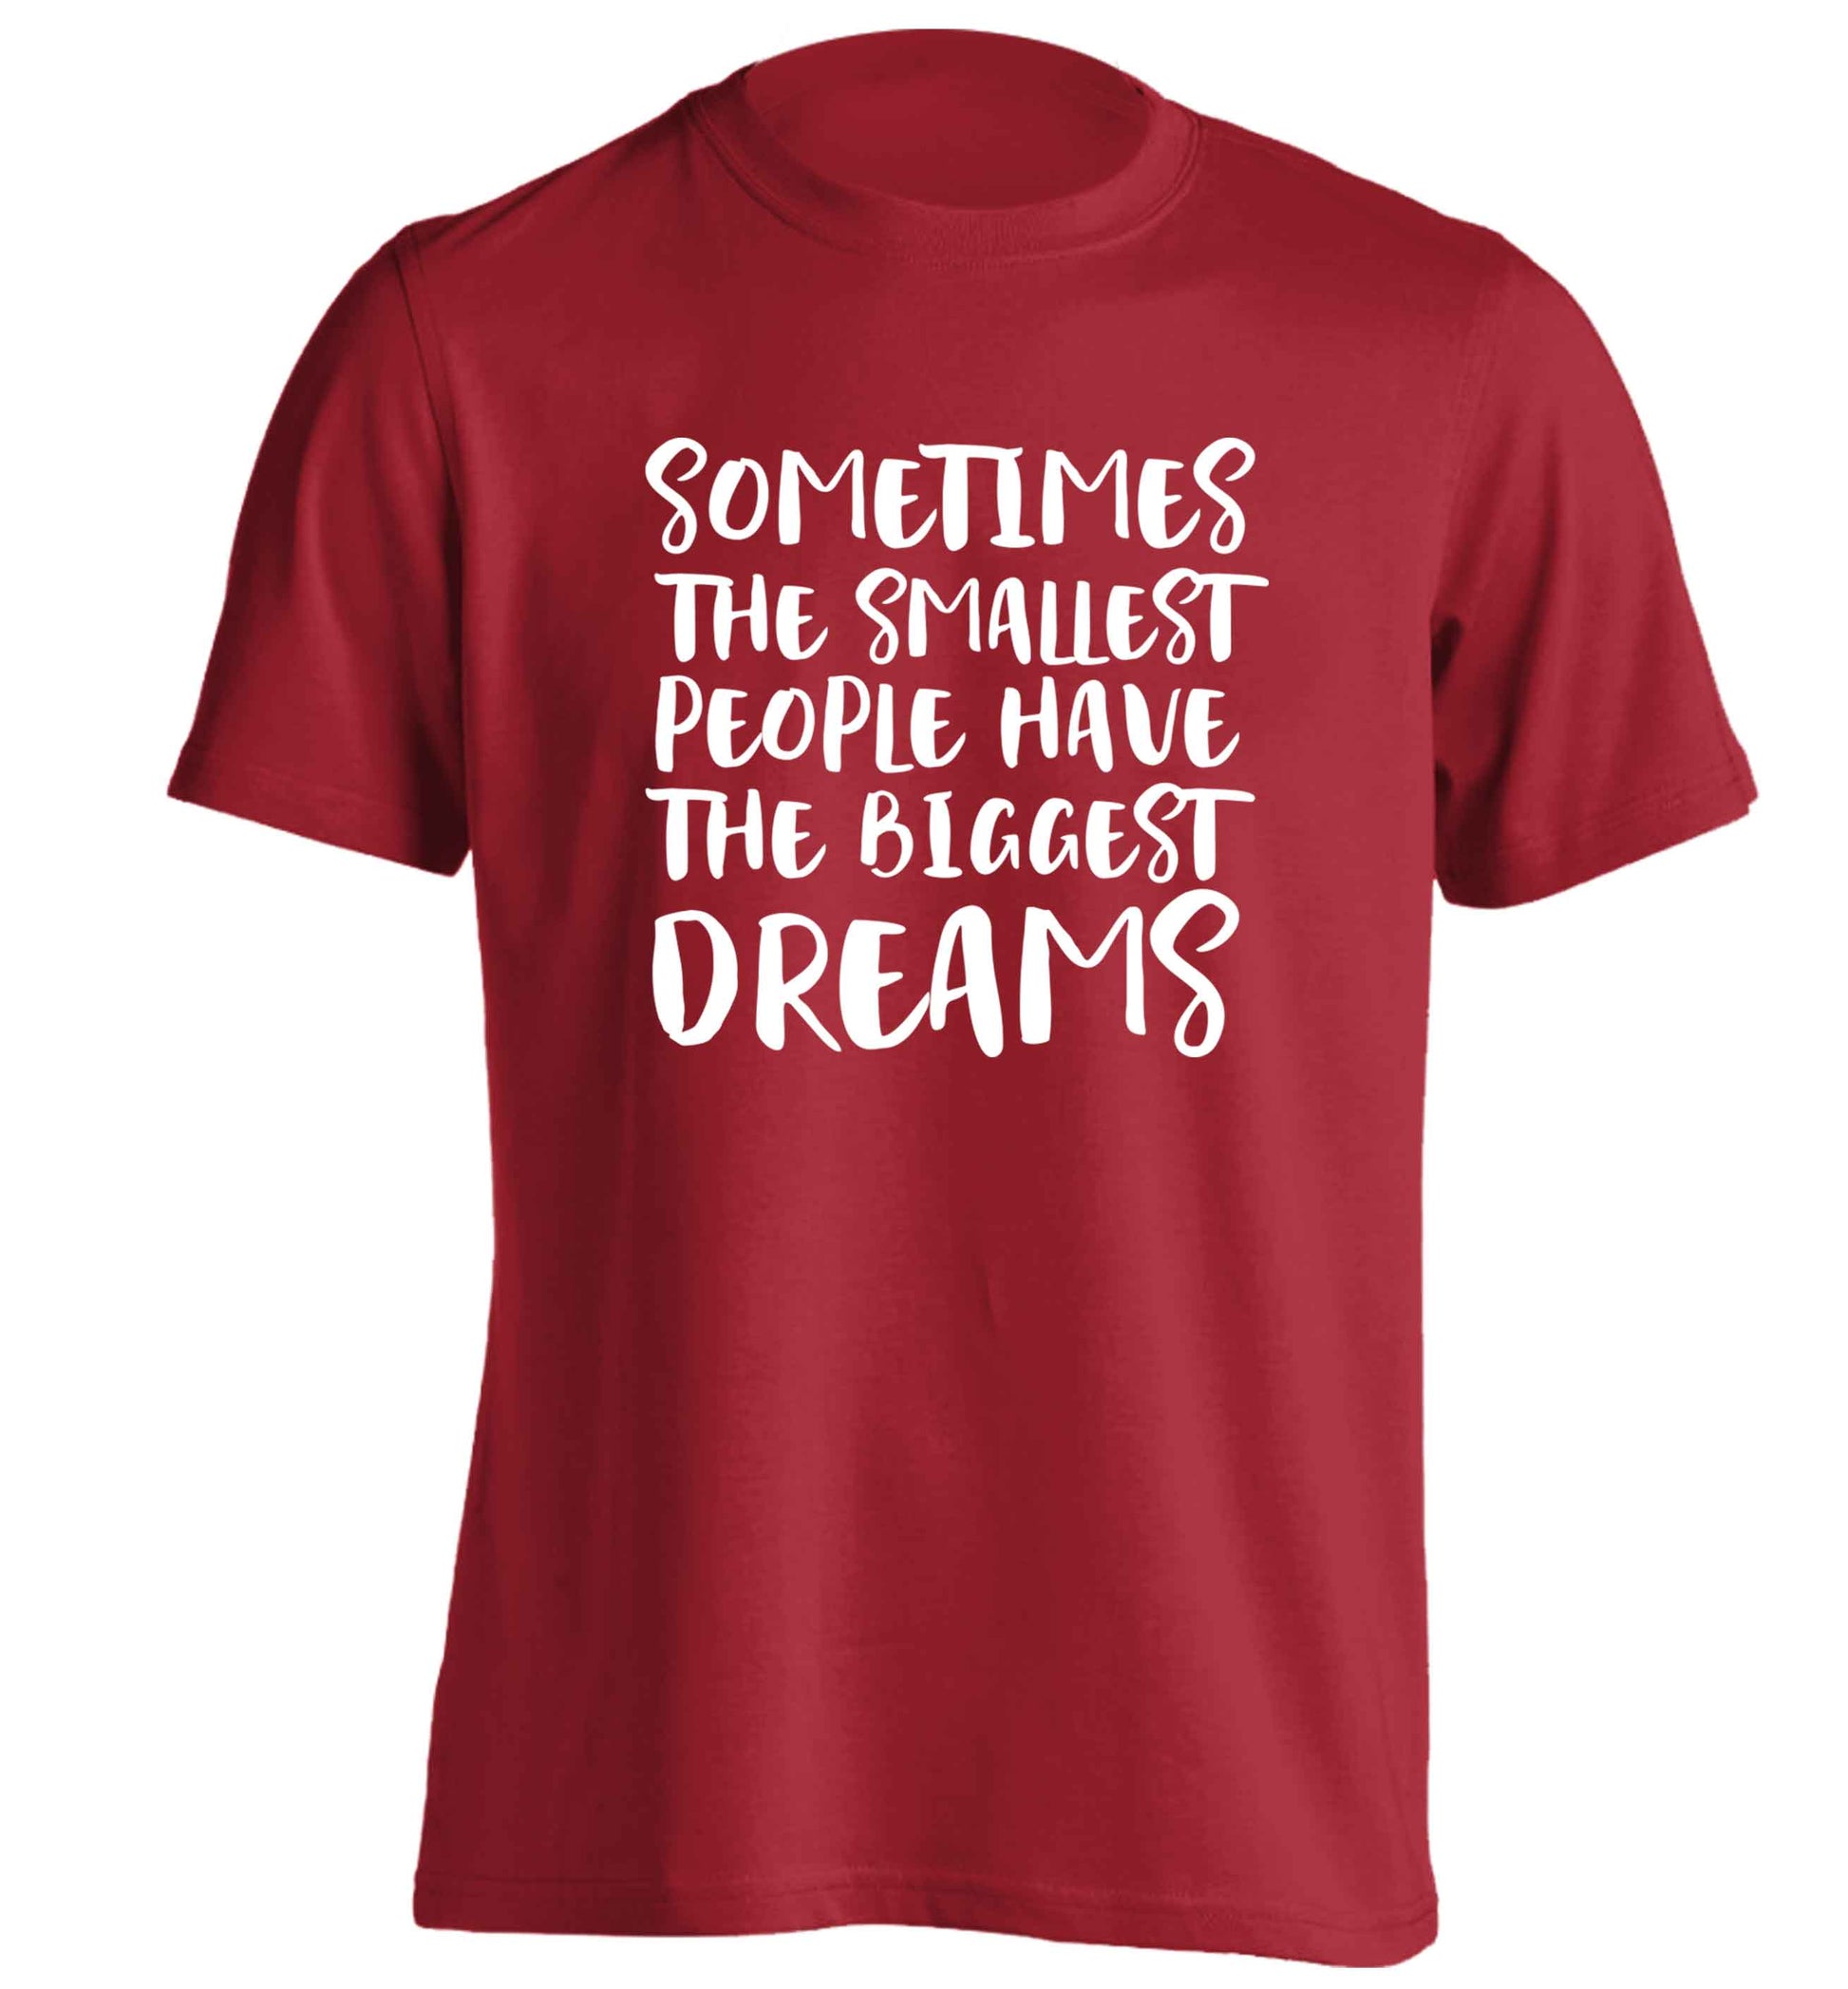 Sometimes the smallest people have the biggest dreams adults unisex red Tshirt 2XL